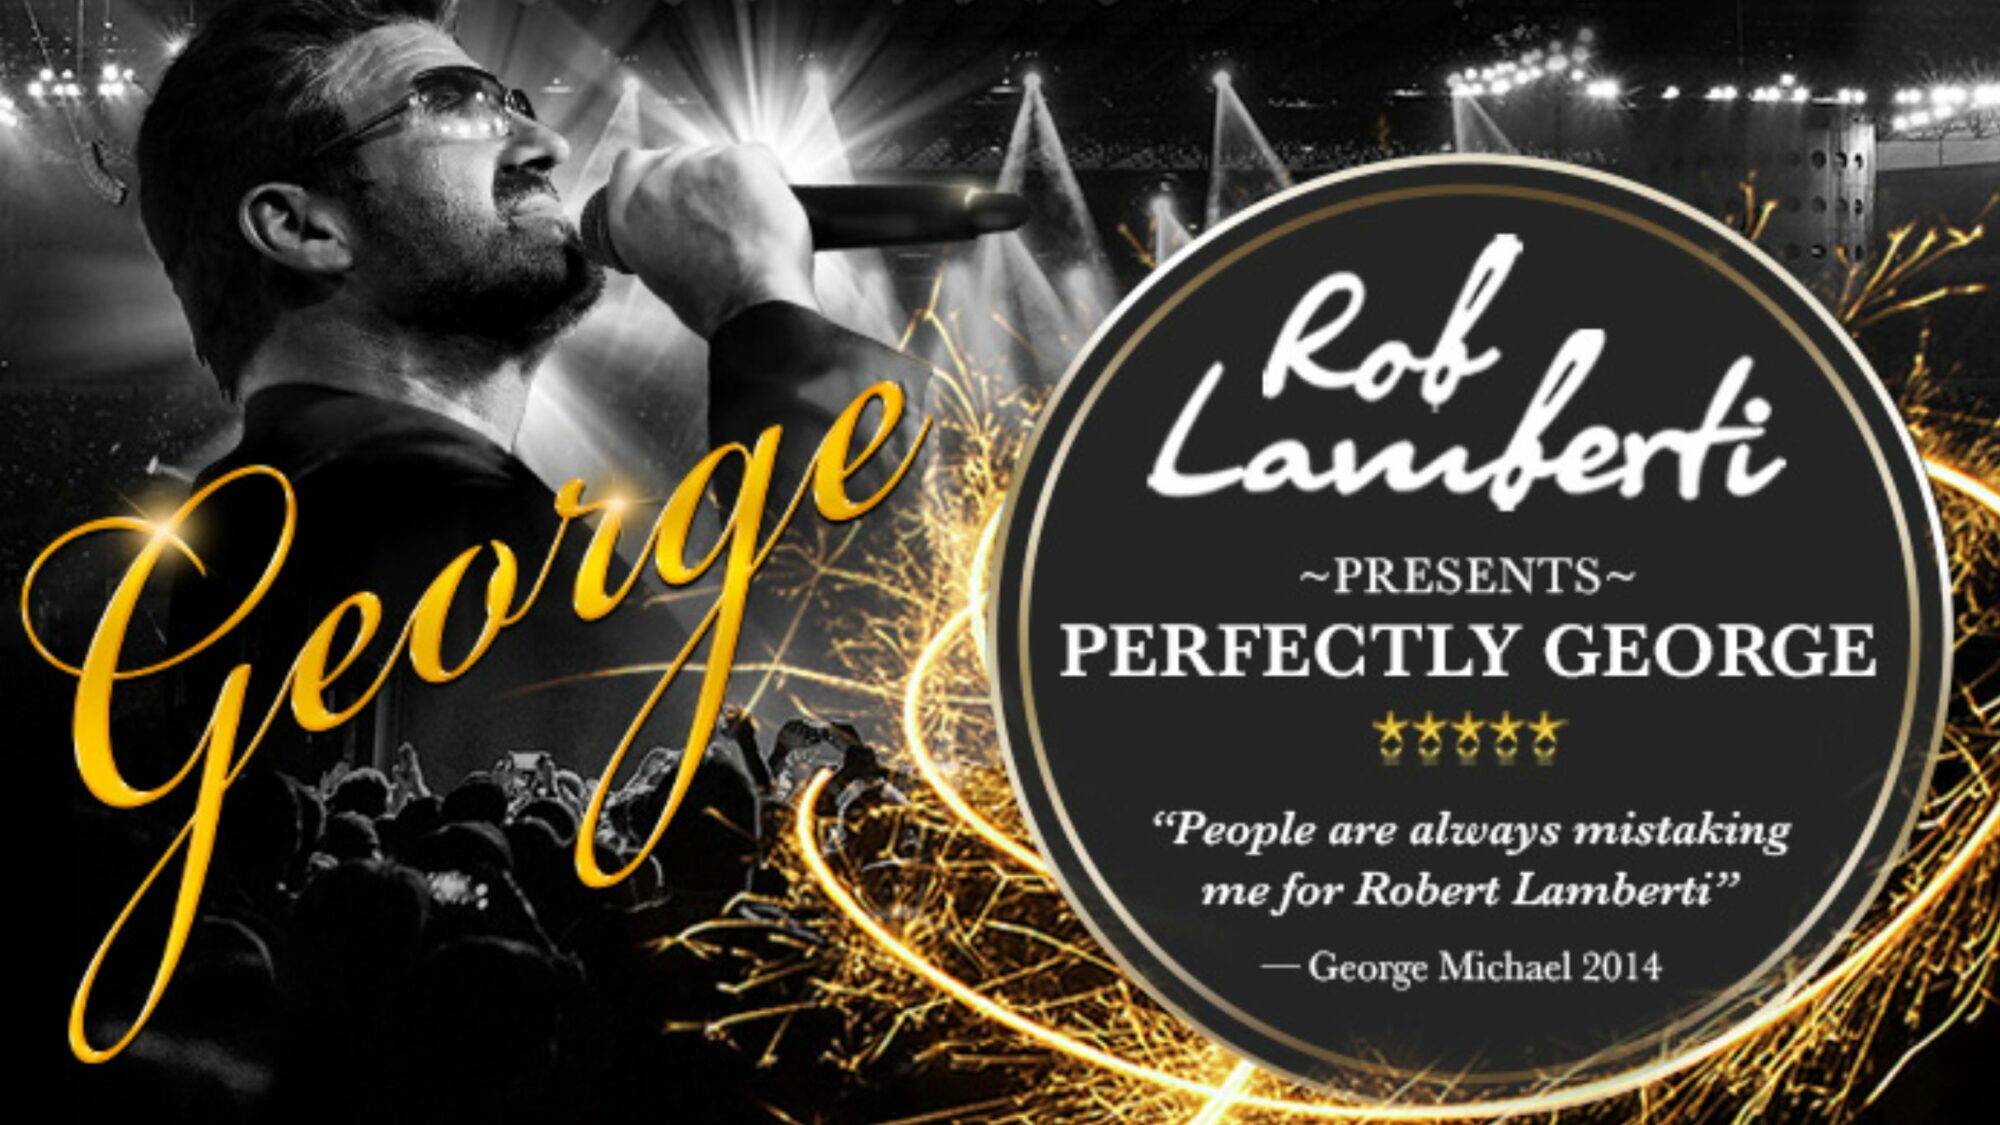 Rob Lamberti – a Celebration of the Songs & Music of George Michael at Scarborough Spa Grand Hall, Scarborough